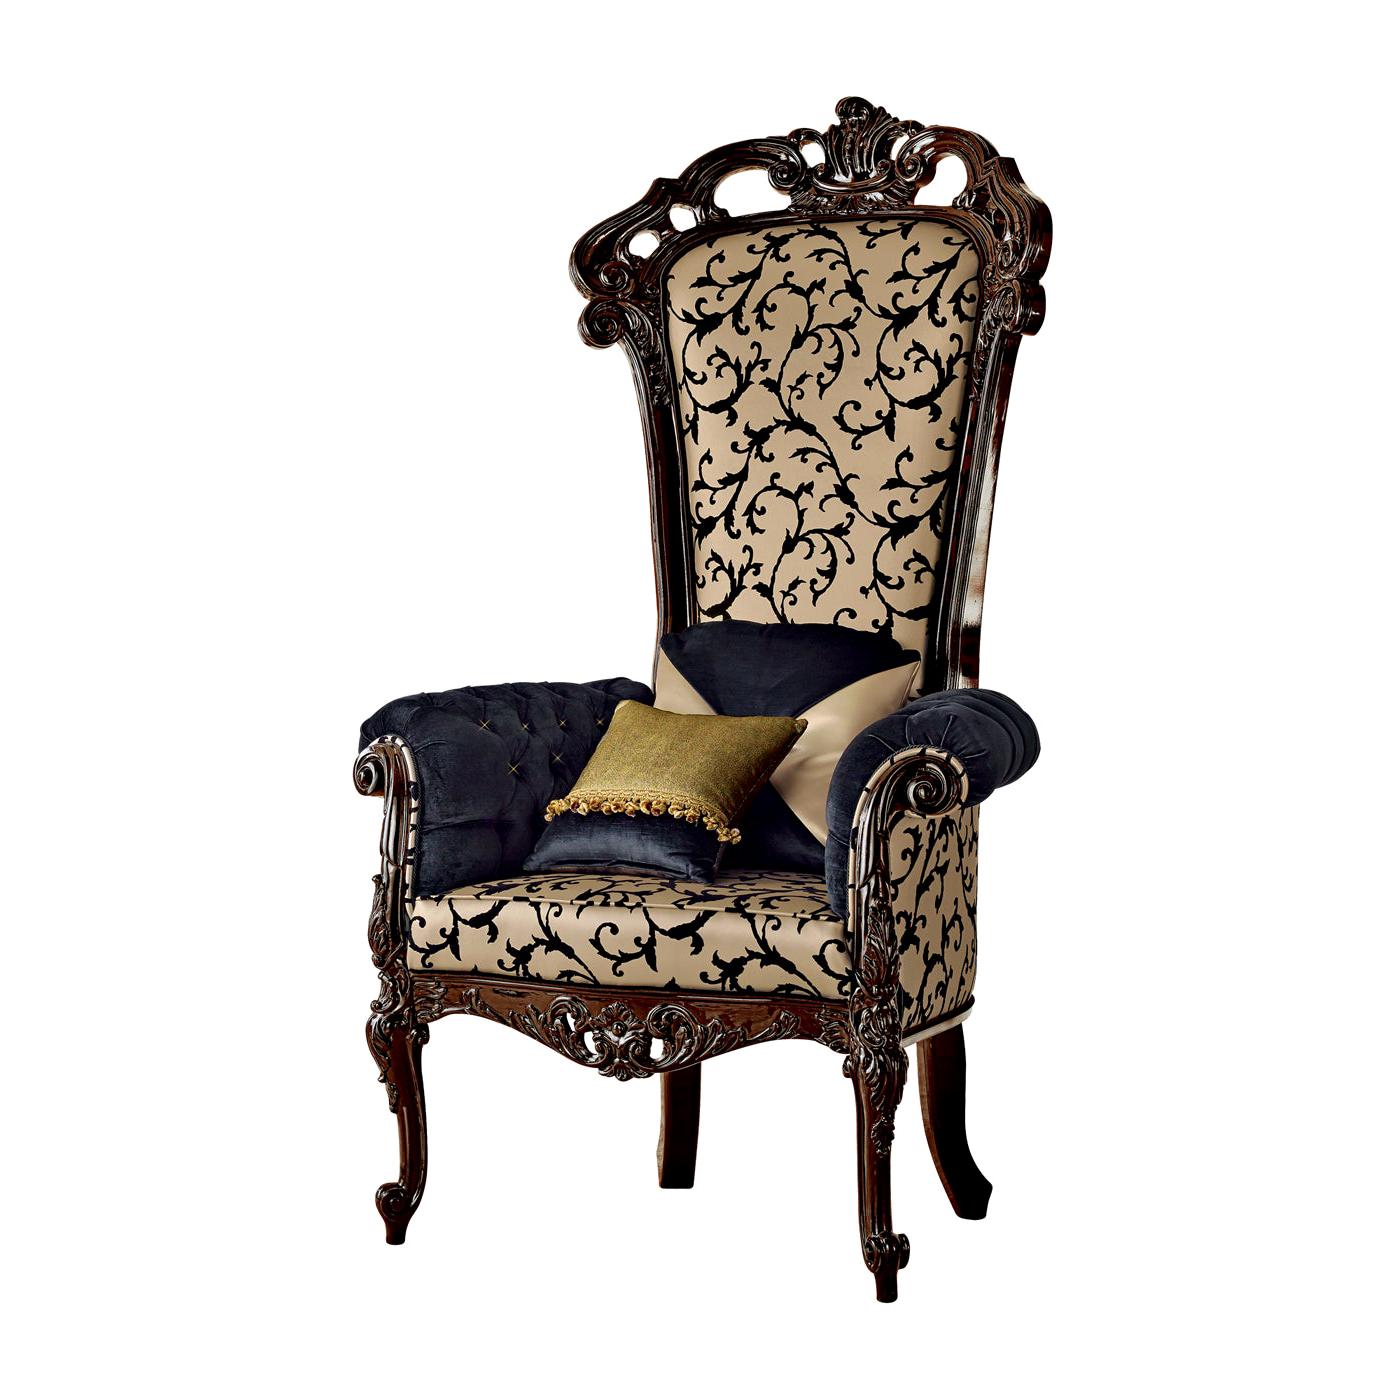 Black and Beige Armchair